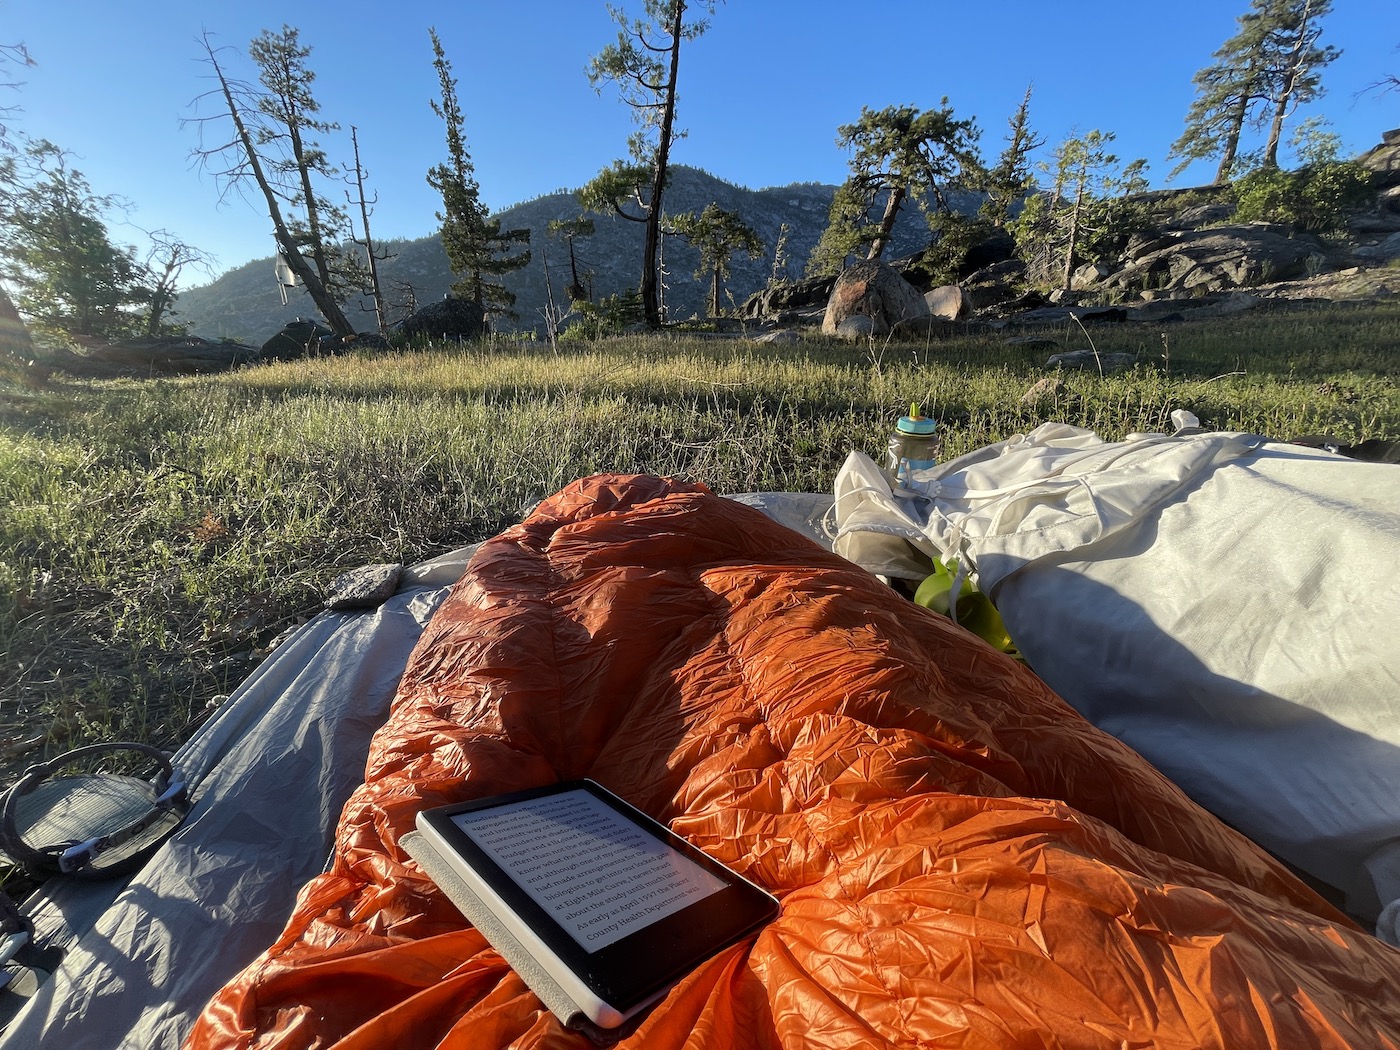 Best sleeping bag for backpacking in summer with cold nights